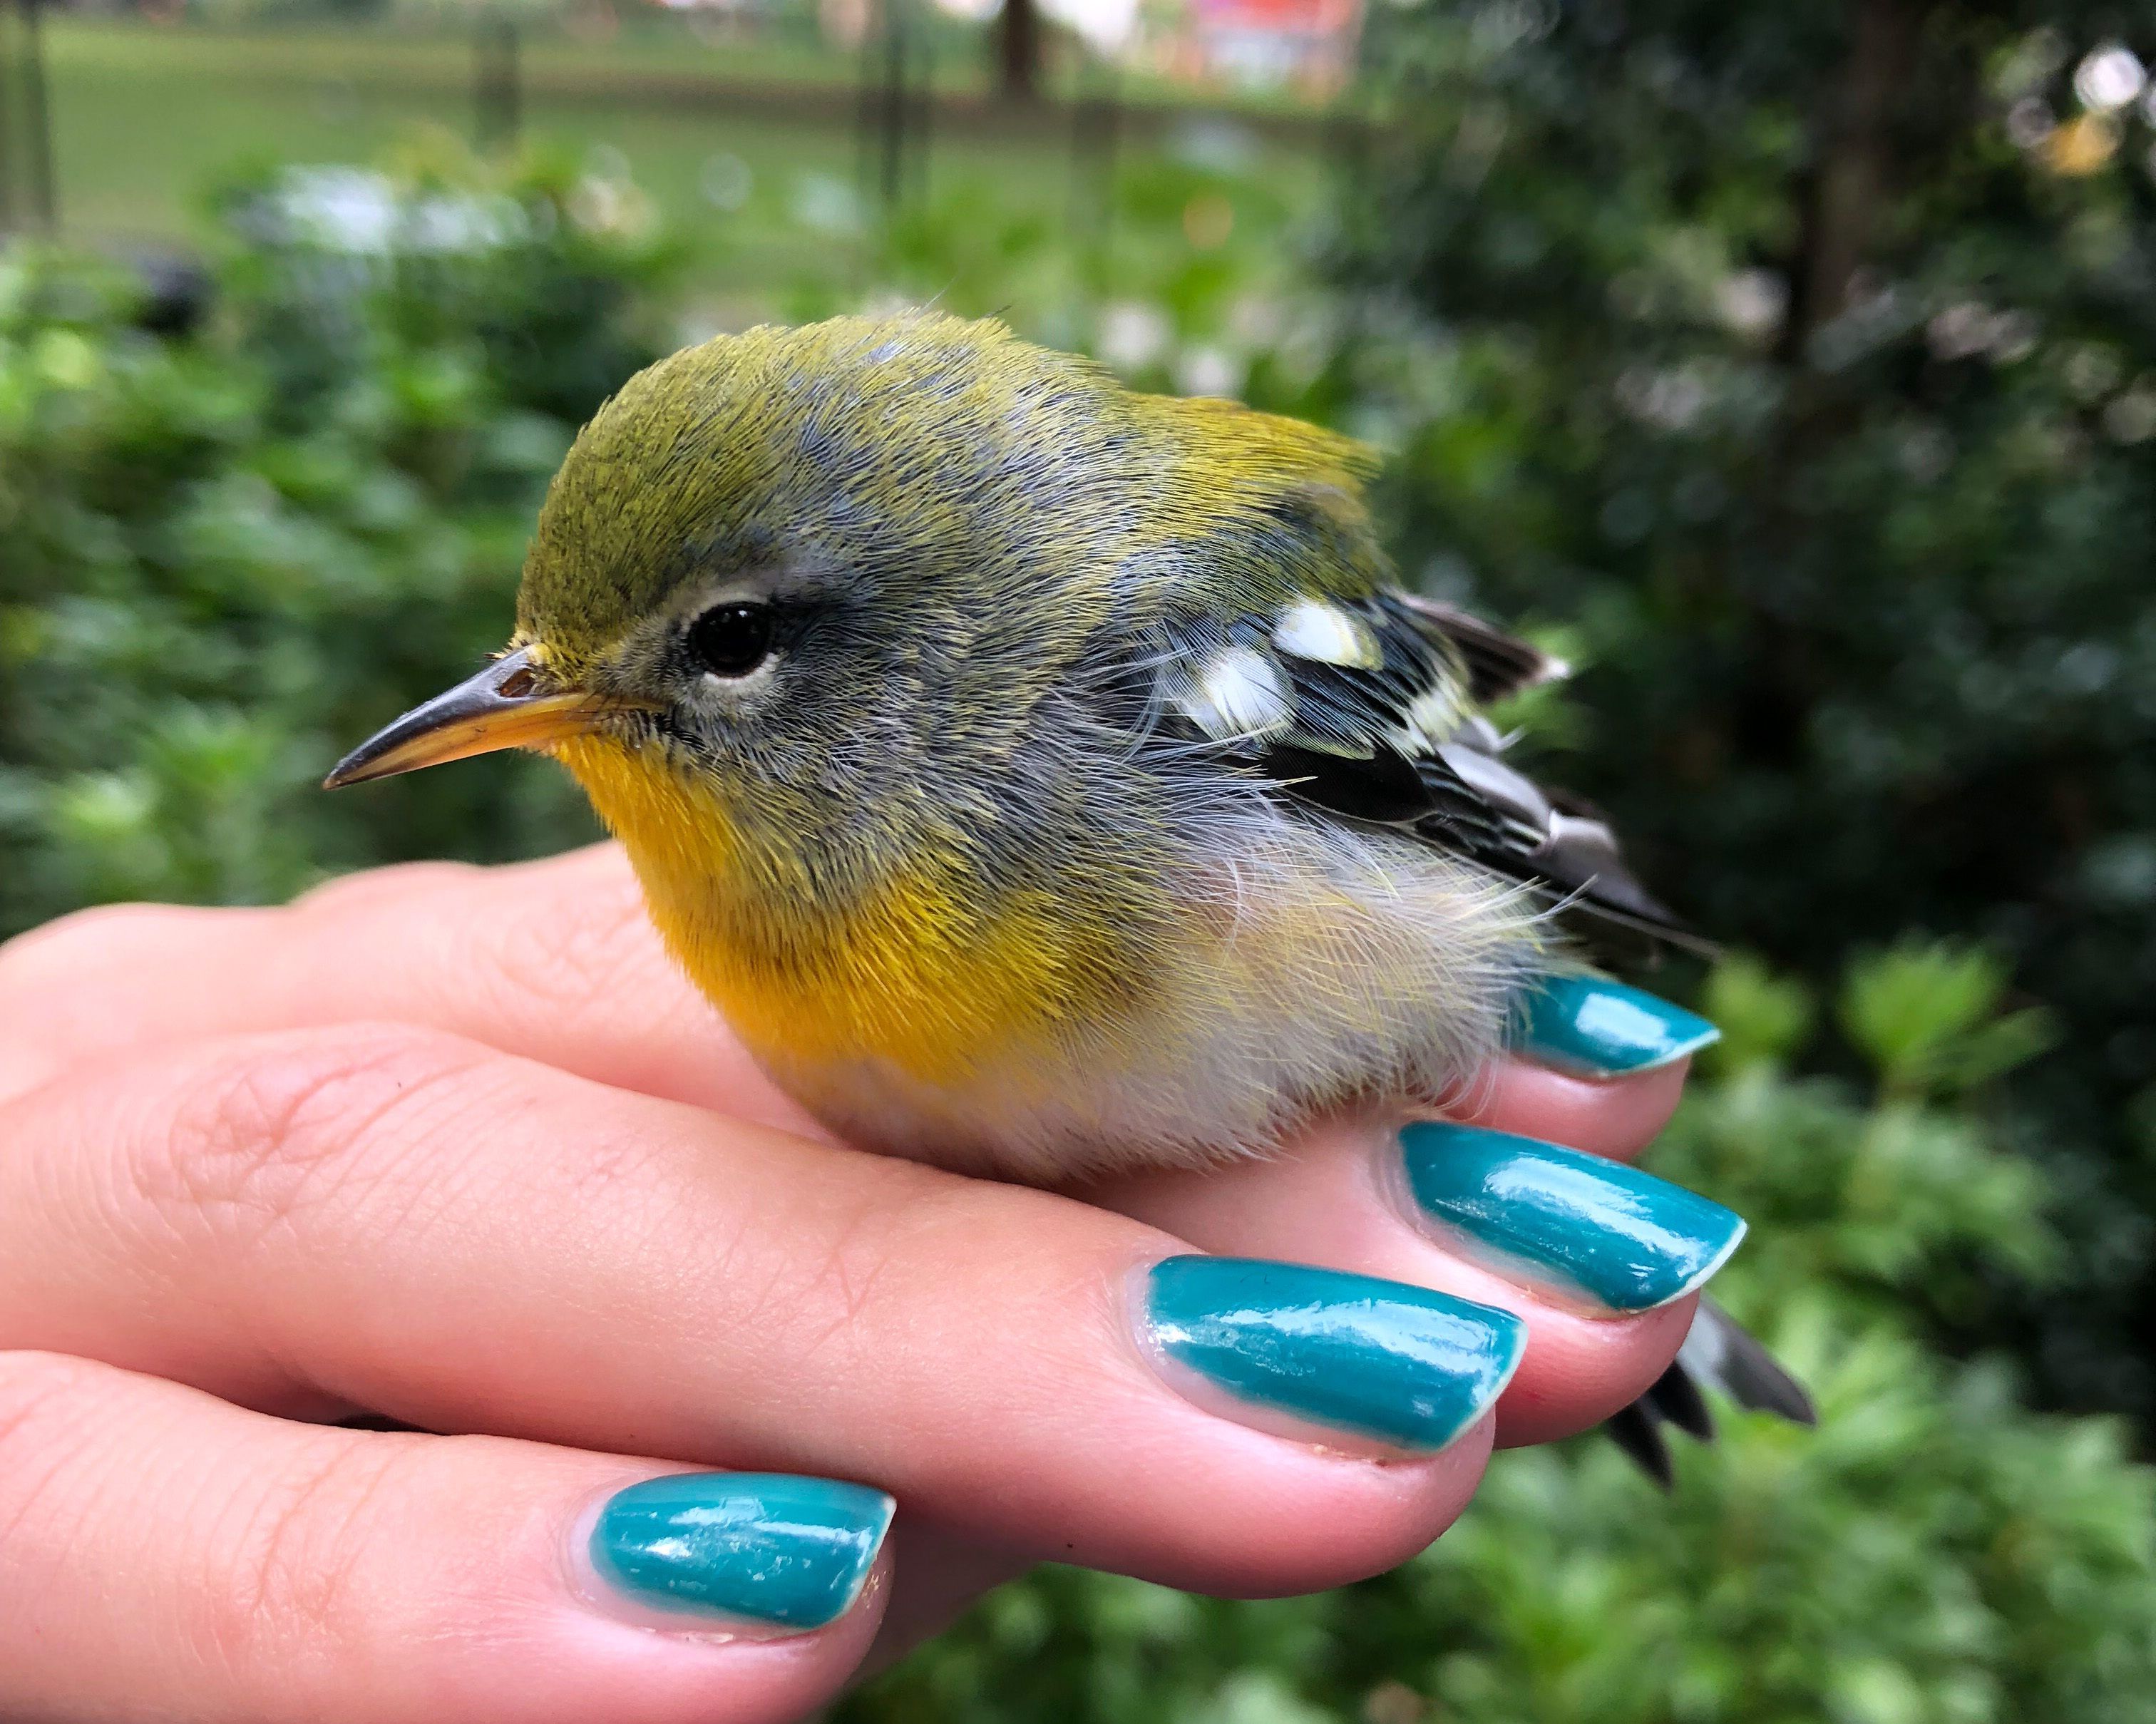 This Northern Parula was found stunned in Manhattan’s Flatiron District. Conservation Biologist Kaitlyn Parkins helped it safely recover at the office before releasing it back into the wild in Madison Square Park, pictured here. Photo: NYC Audubon